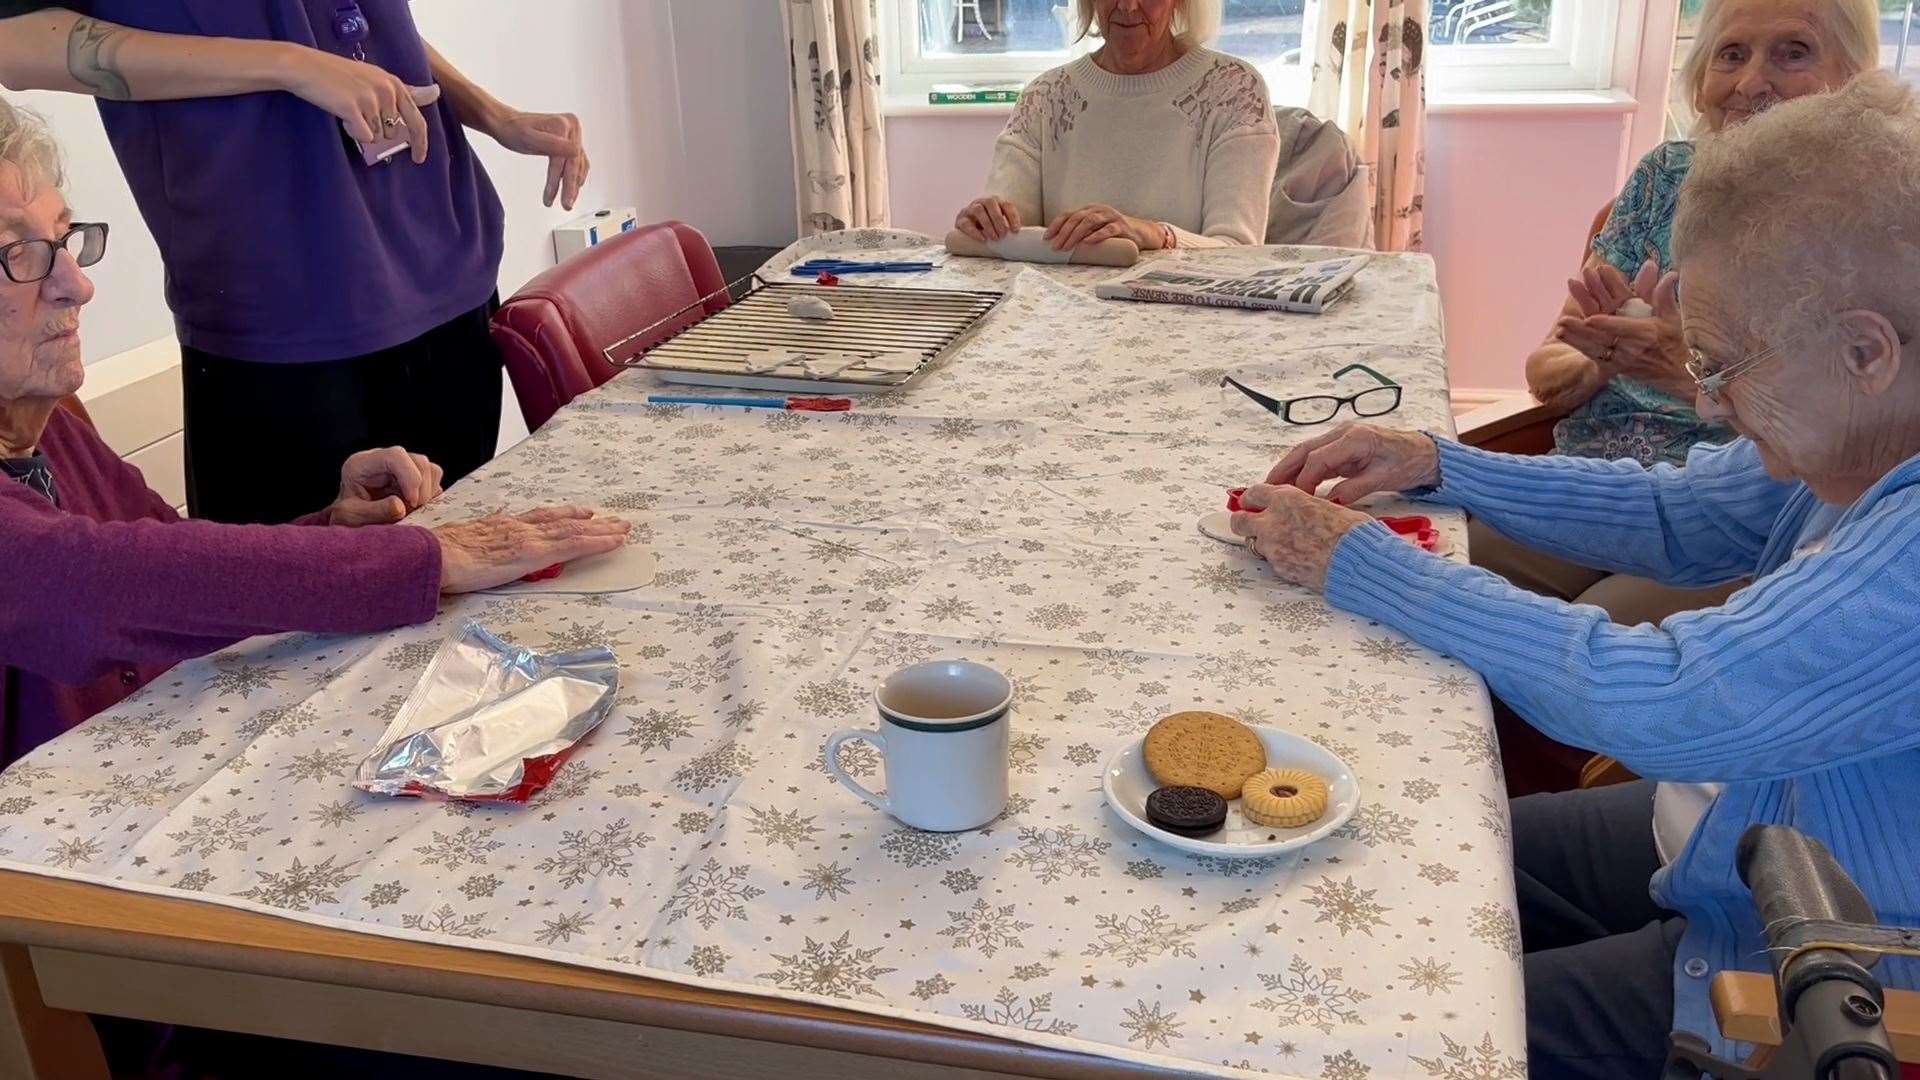 Residents at lunch-time tea together in a dining area at the home